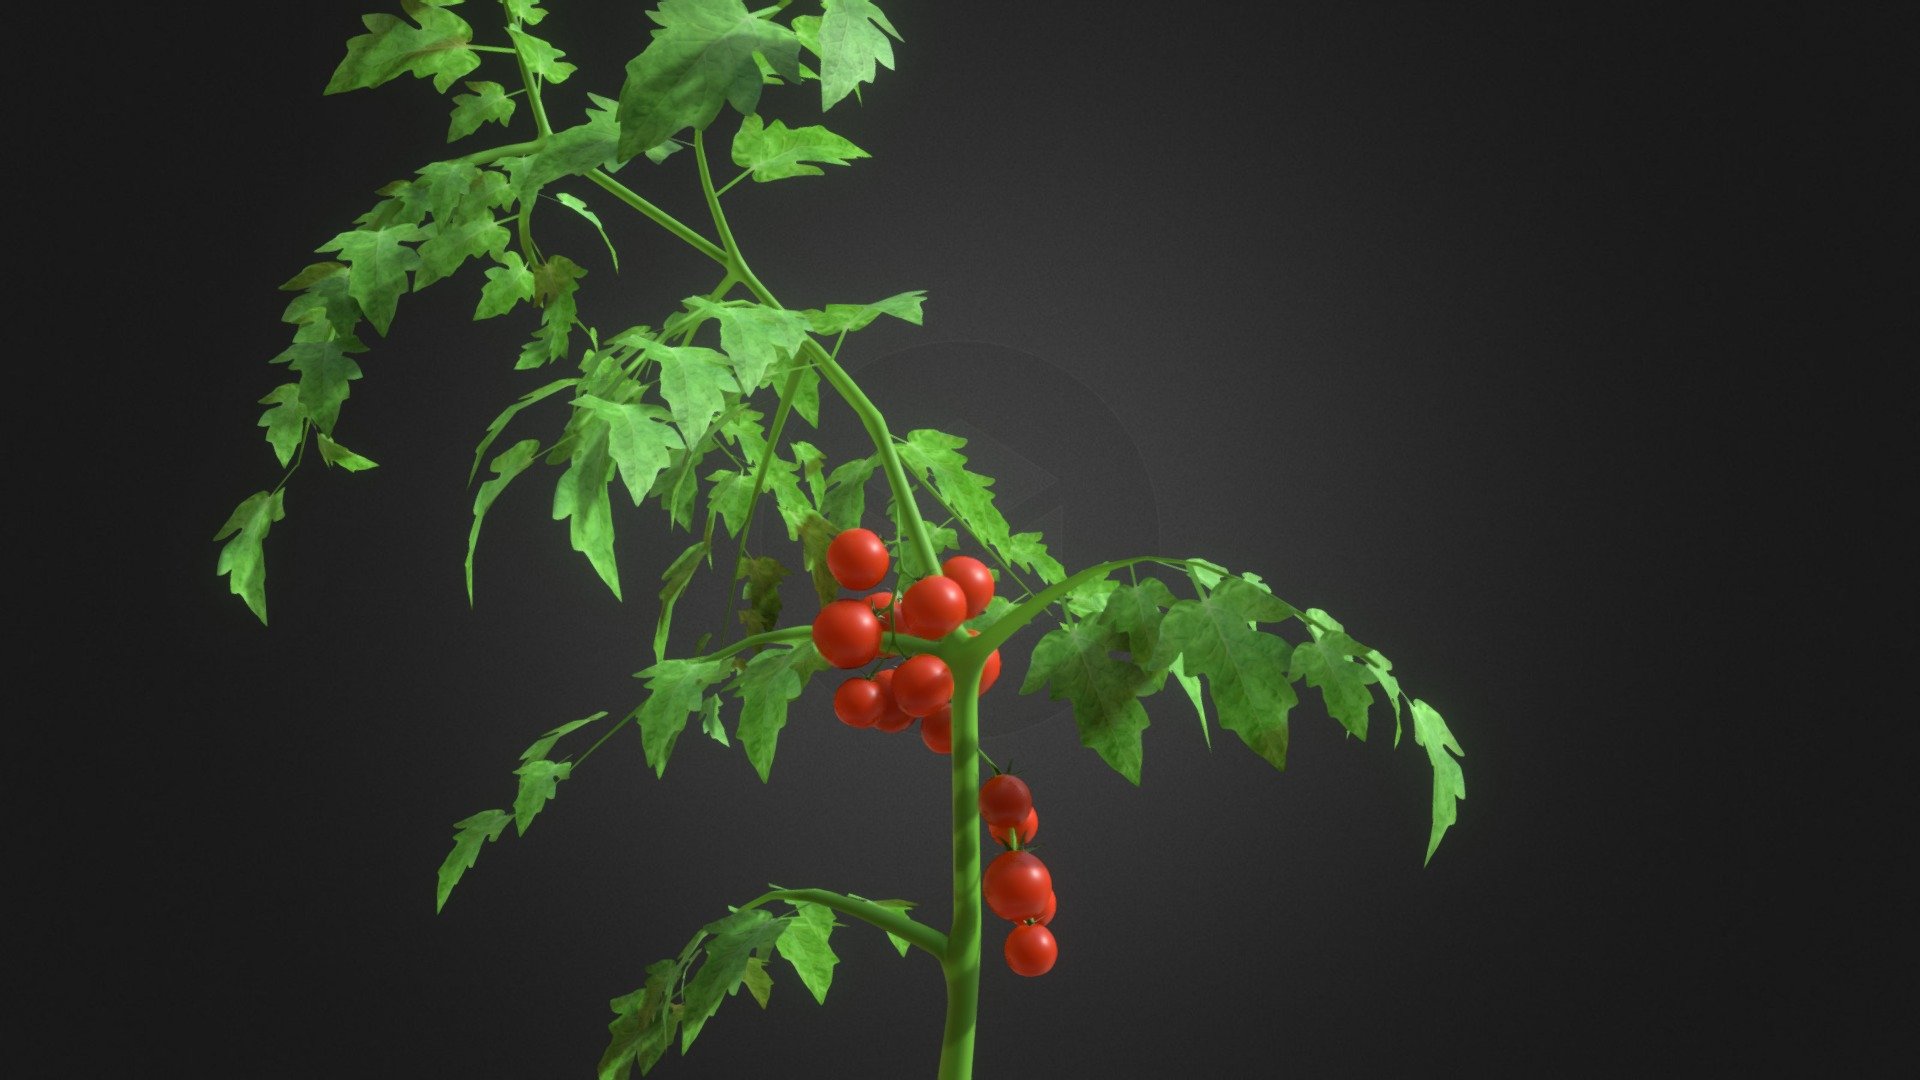 Hello. 
This is low poly tomato plant. It was made in blender and exported to FBX to be uploaded here 3d model